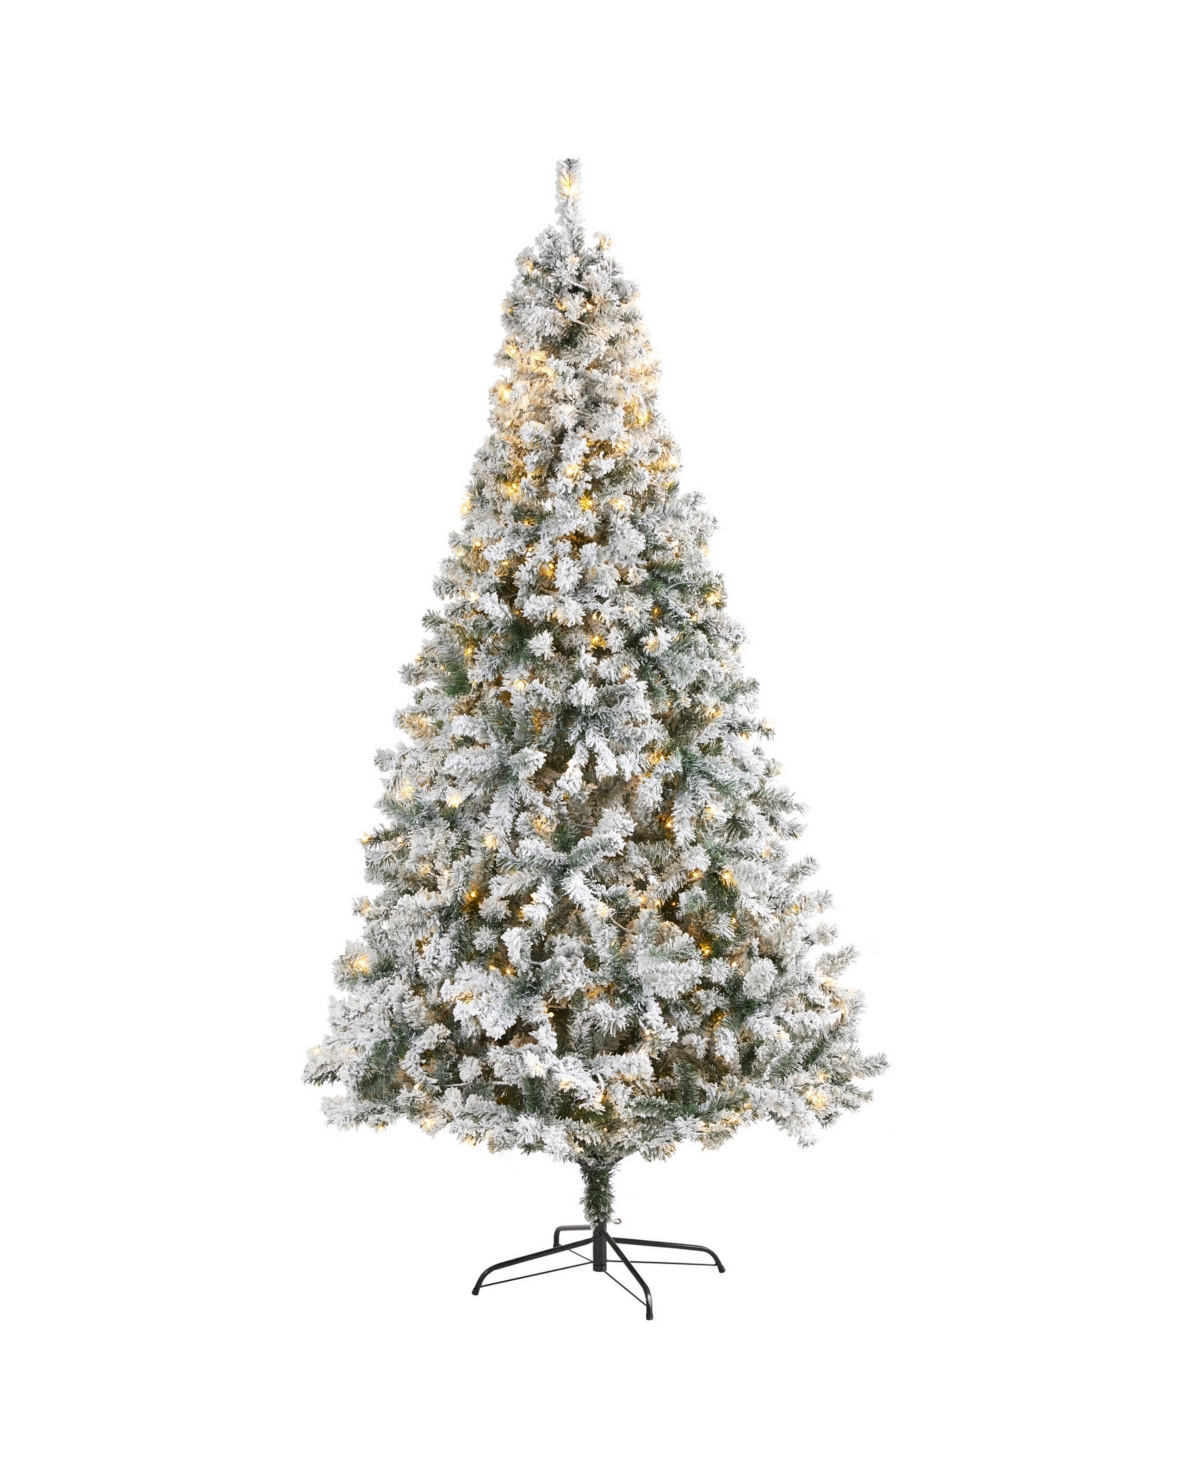 Flocked Rock Springs Spruce Artificial Christmas Tree with 500 Clear Led Lights and 1186 Bendable Branches - Multi